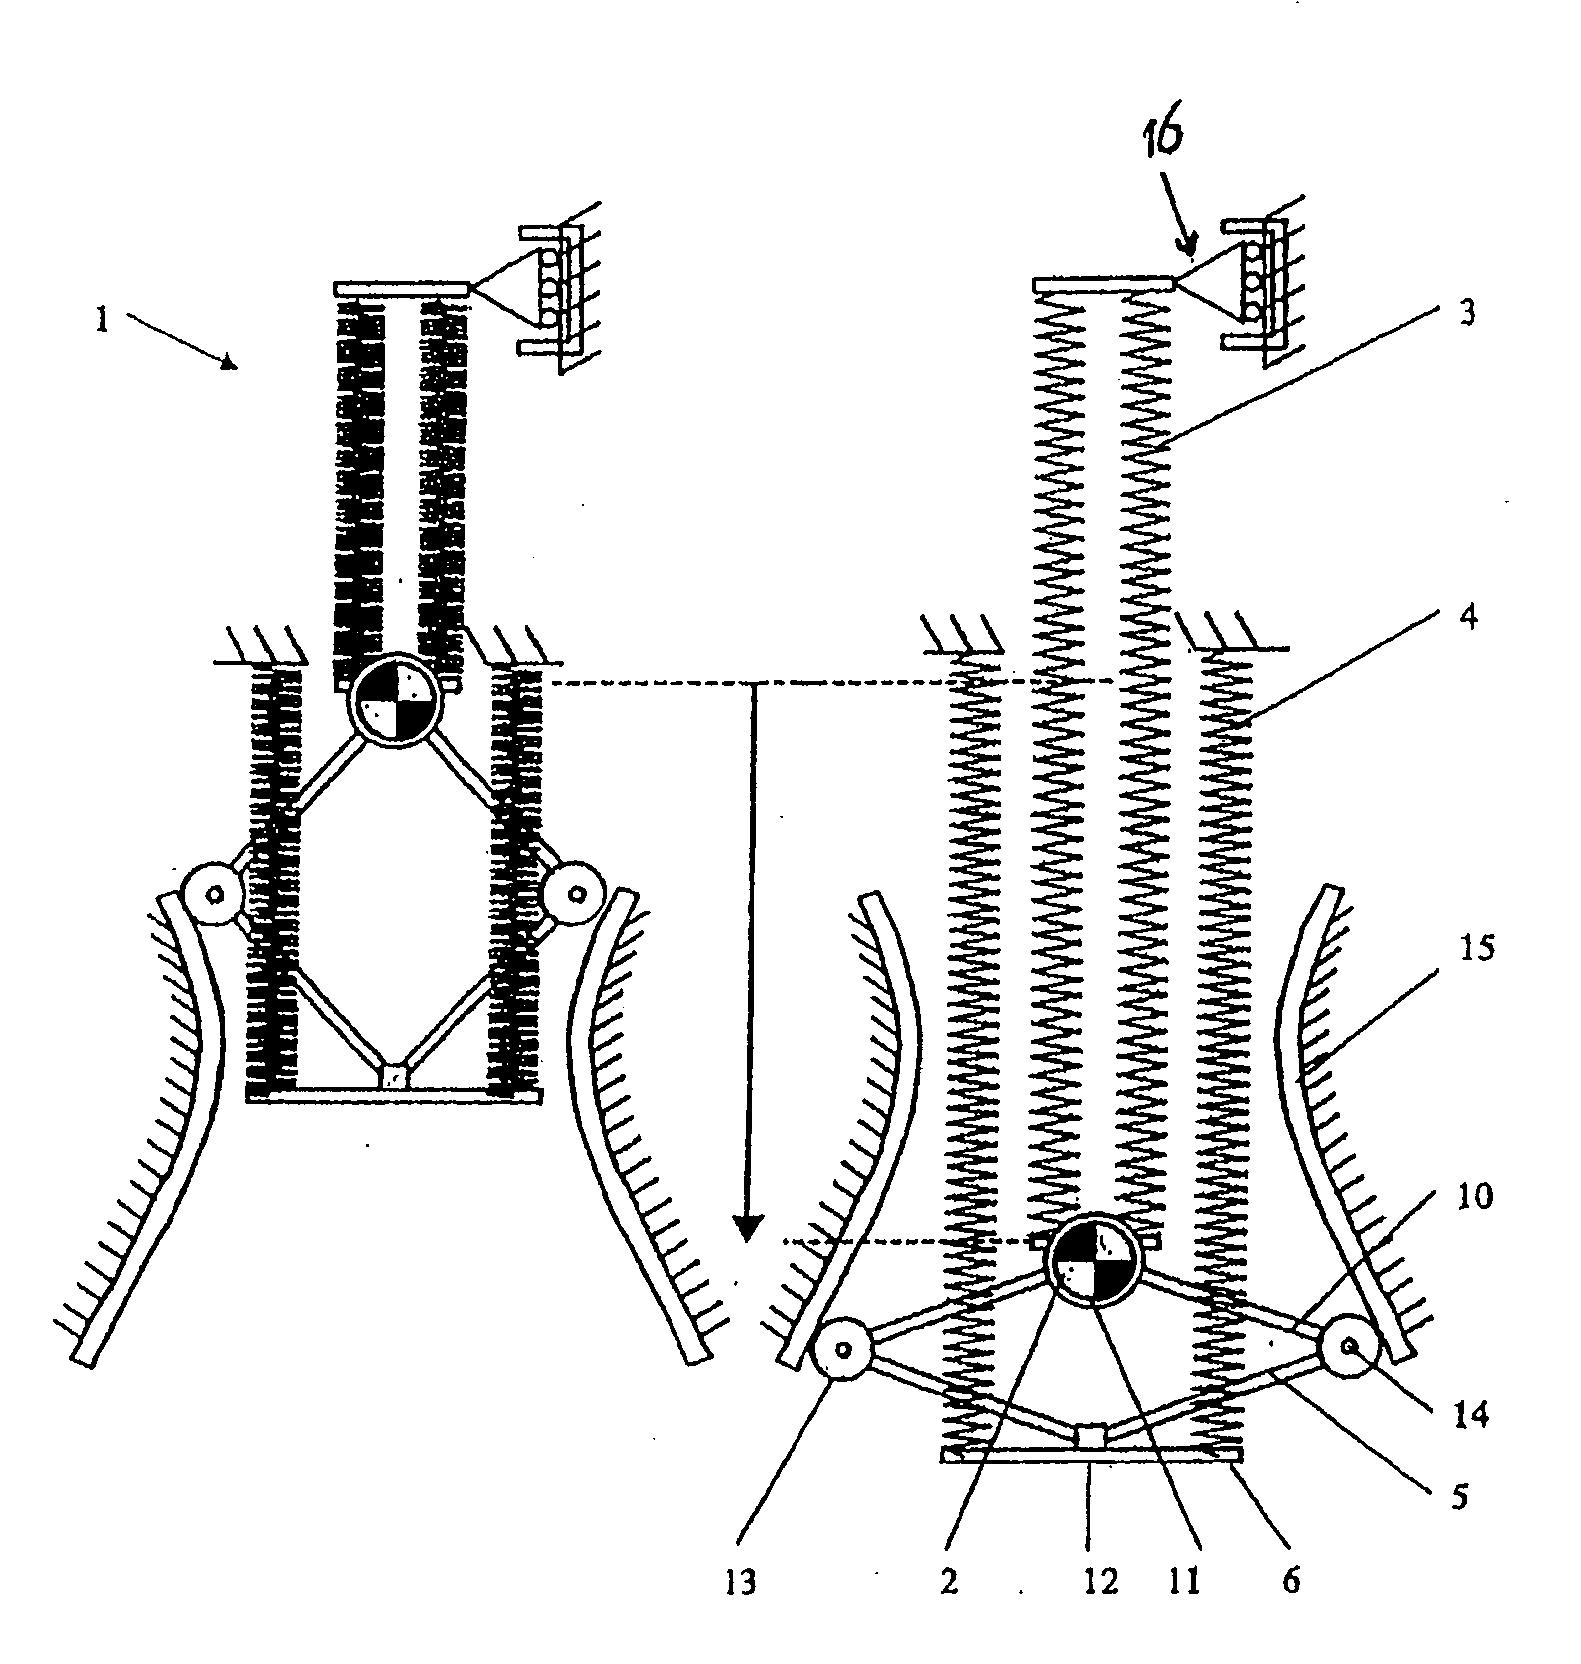 Apparatus for Exercising a Force on a Load